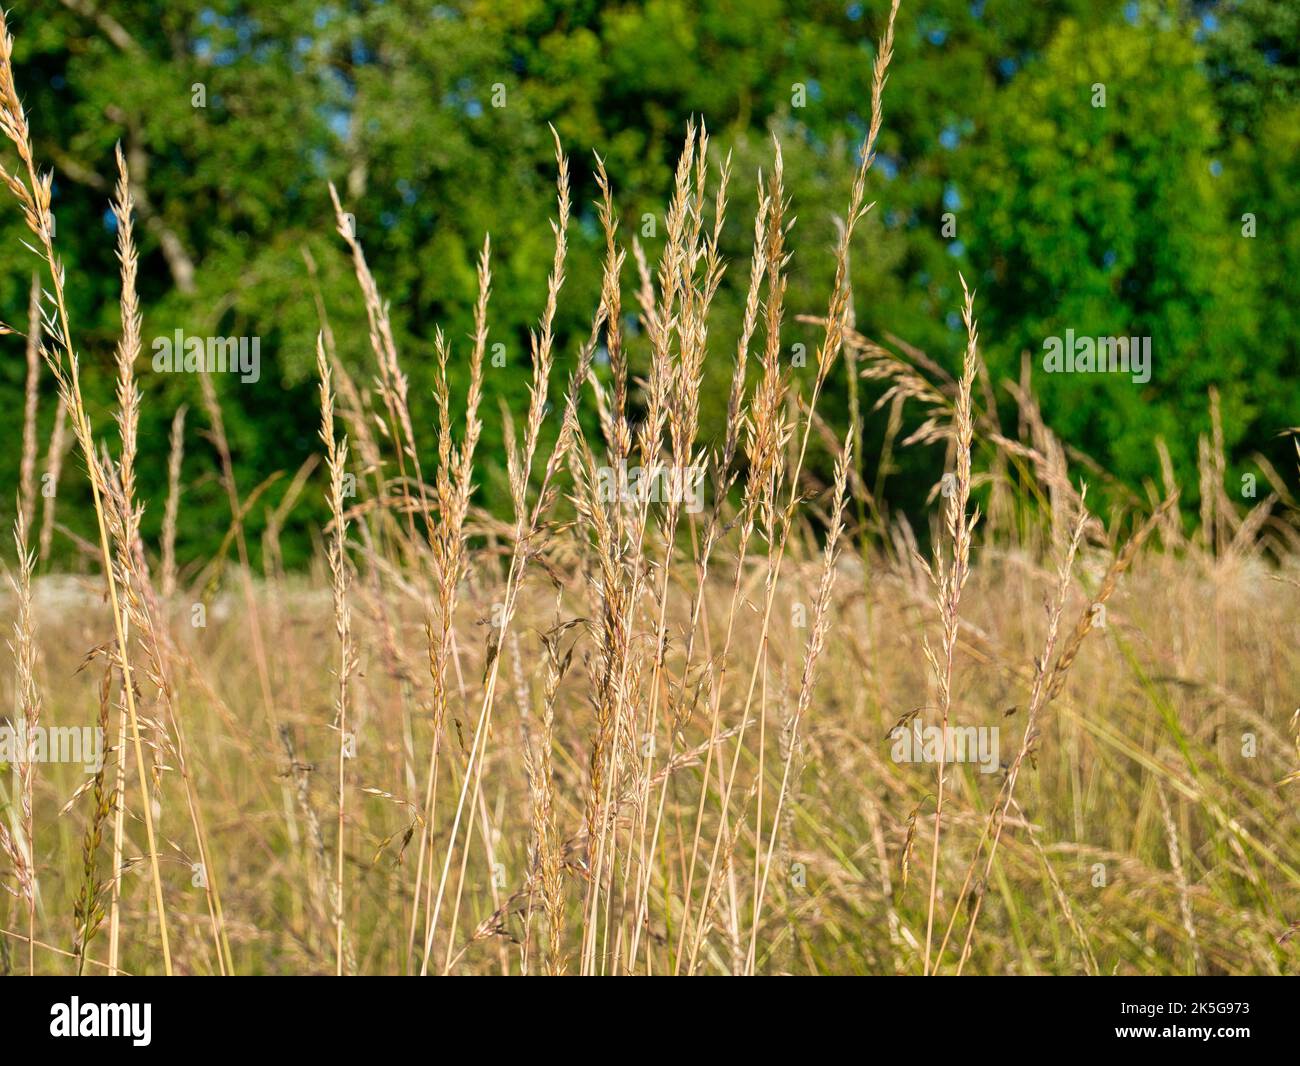 Tall, golden grasses in land left to rewild as part of a land management programme to encourage biodiversity. Taken on a sunny day in summer. Stock Photo